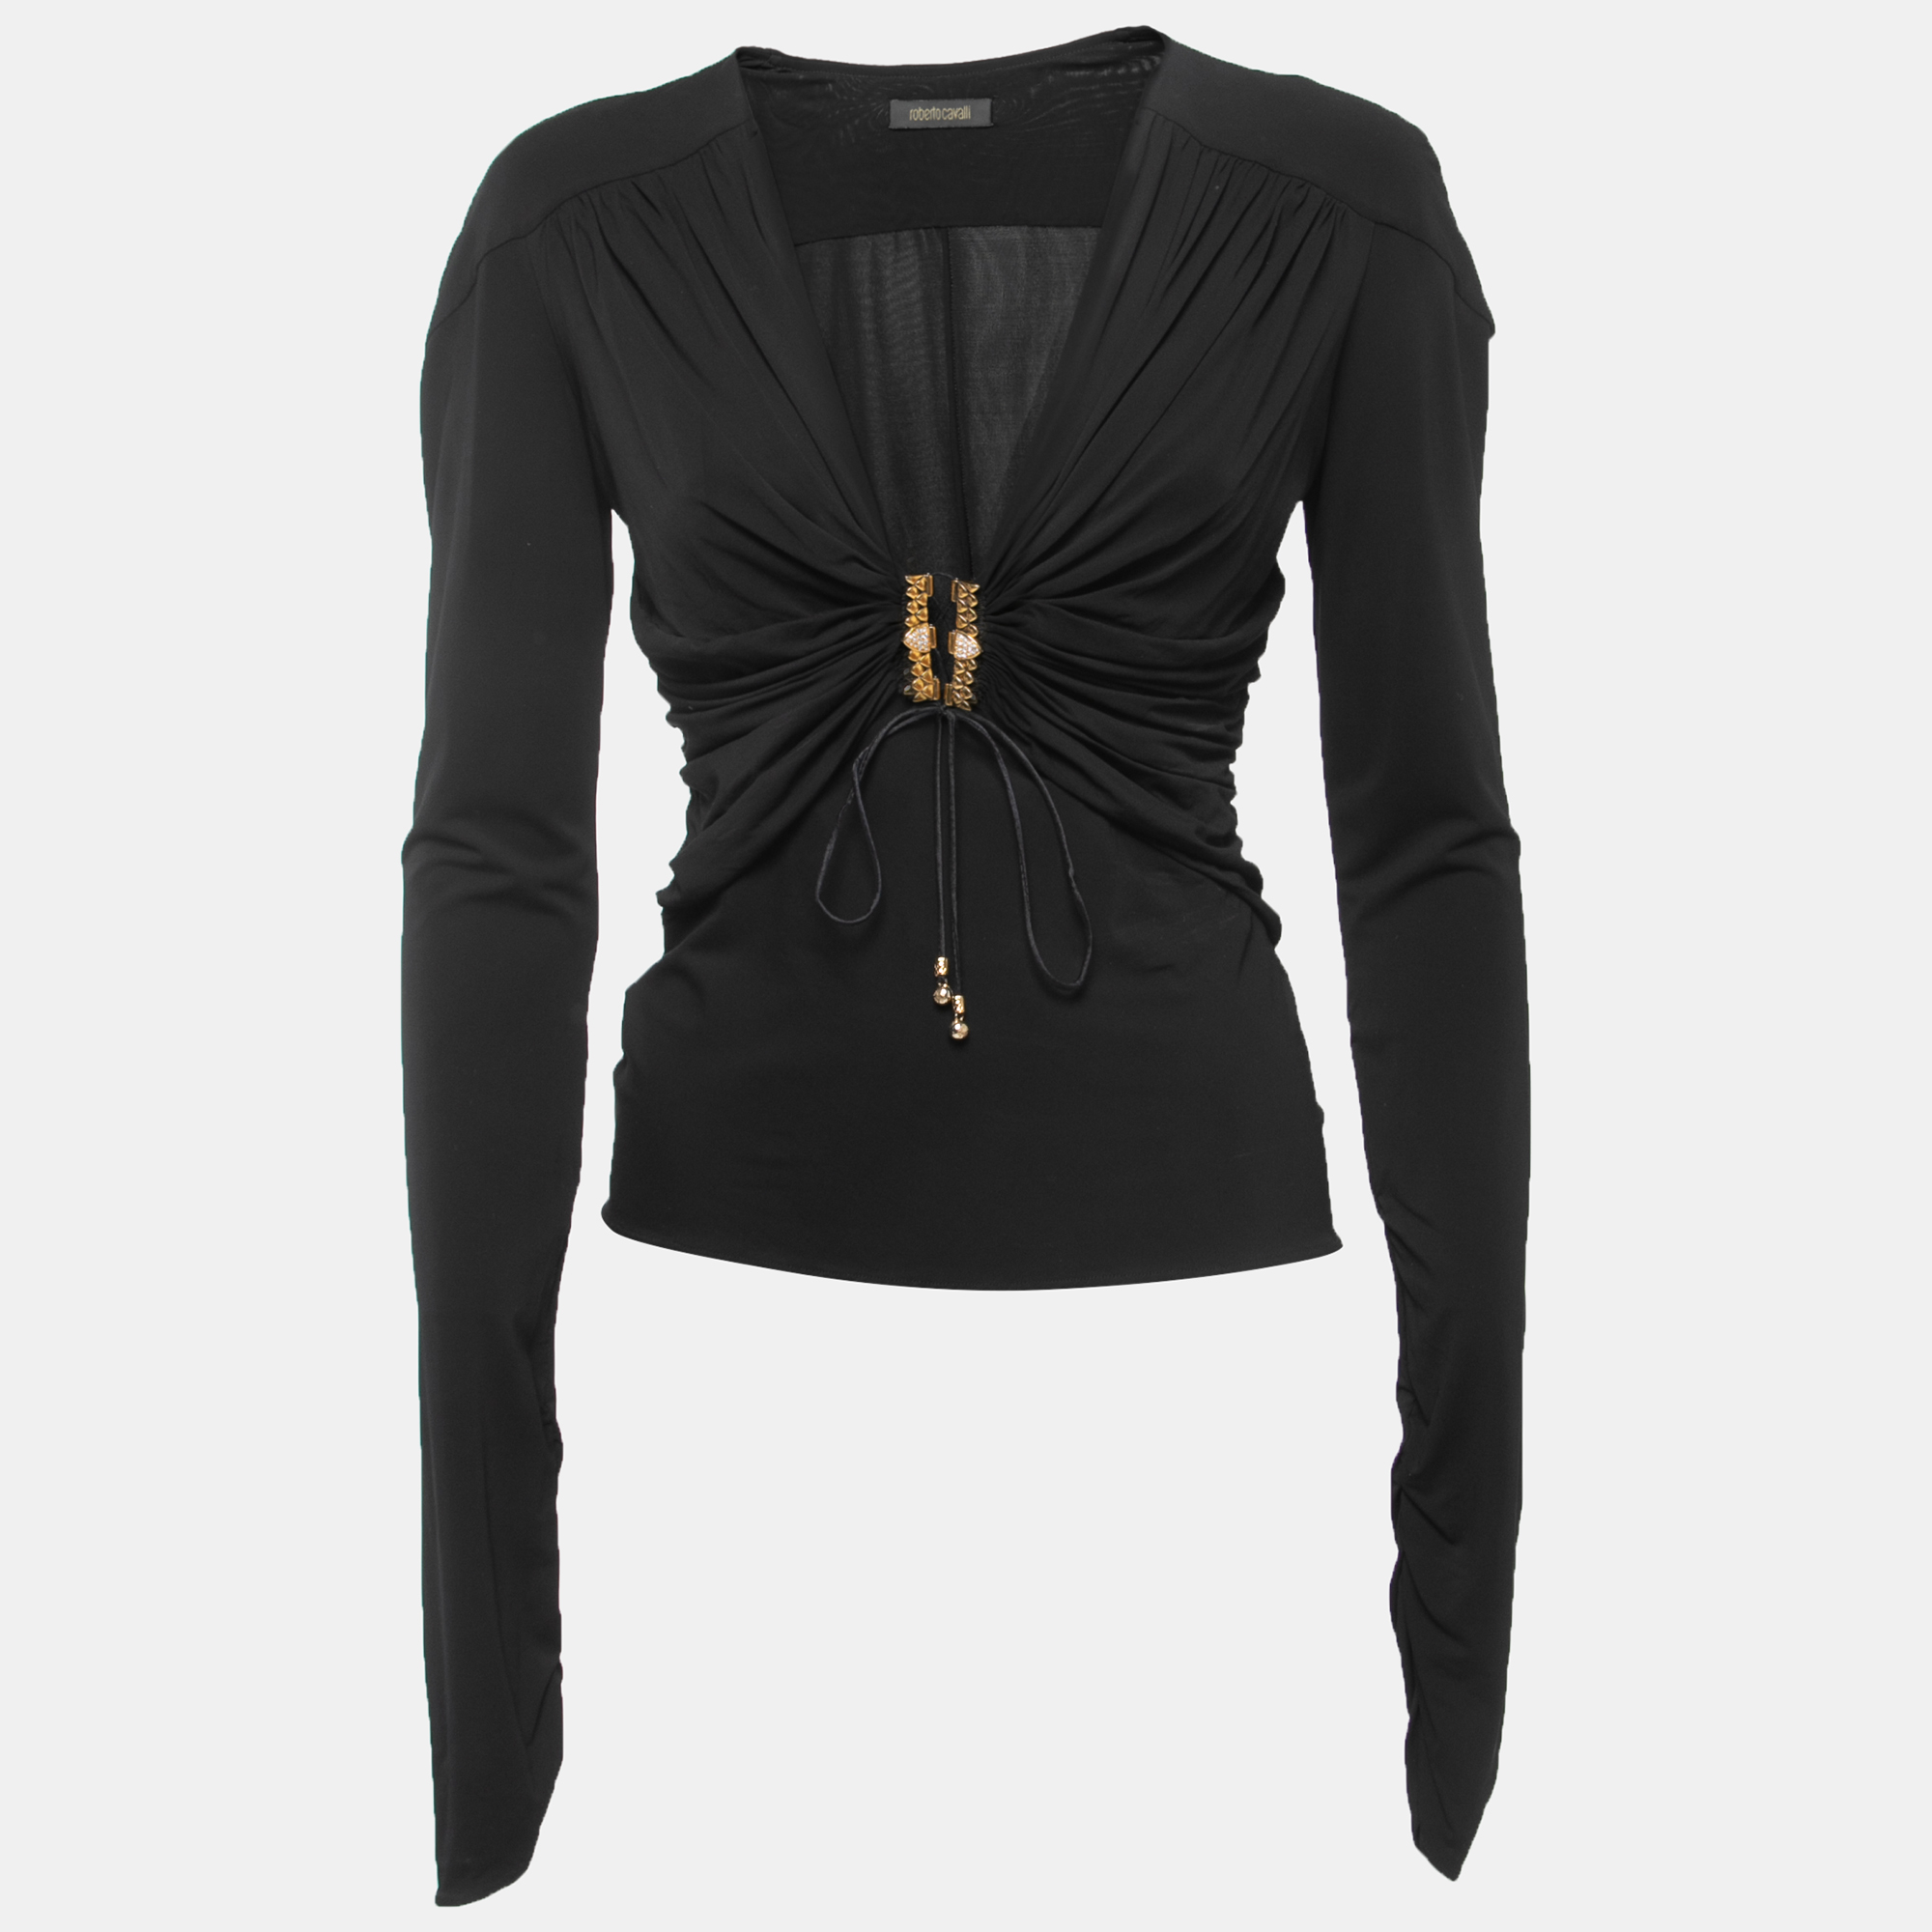 Roberto Cavalli Black Stretch Jersey Lace-Up Ruched Top M